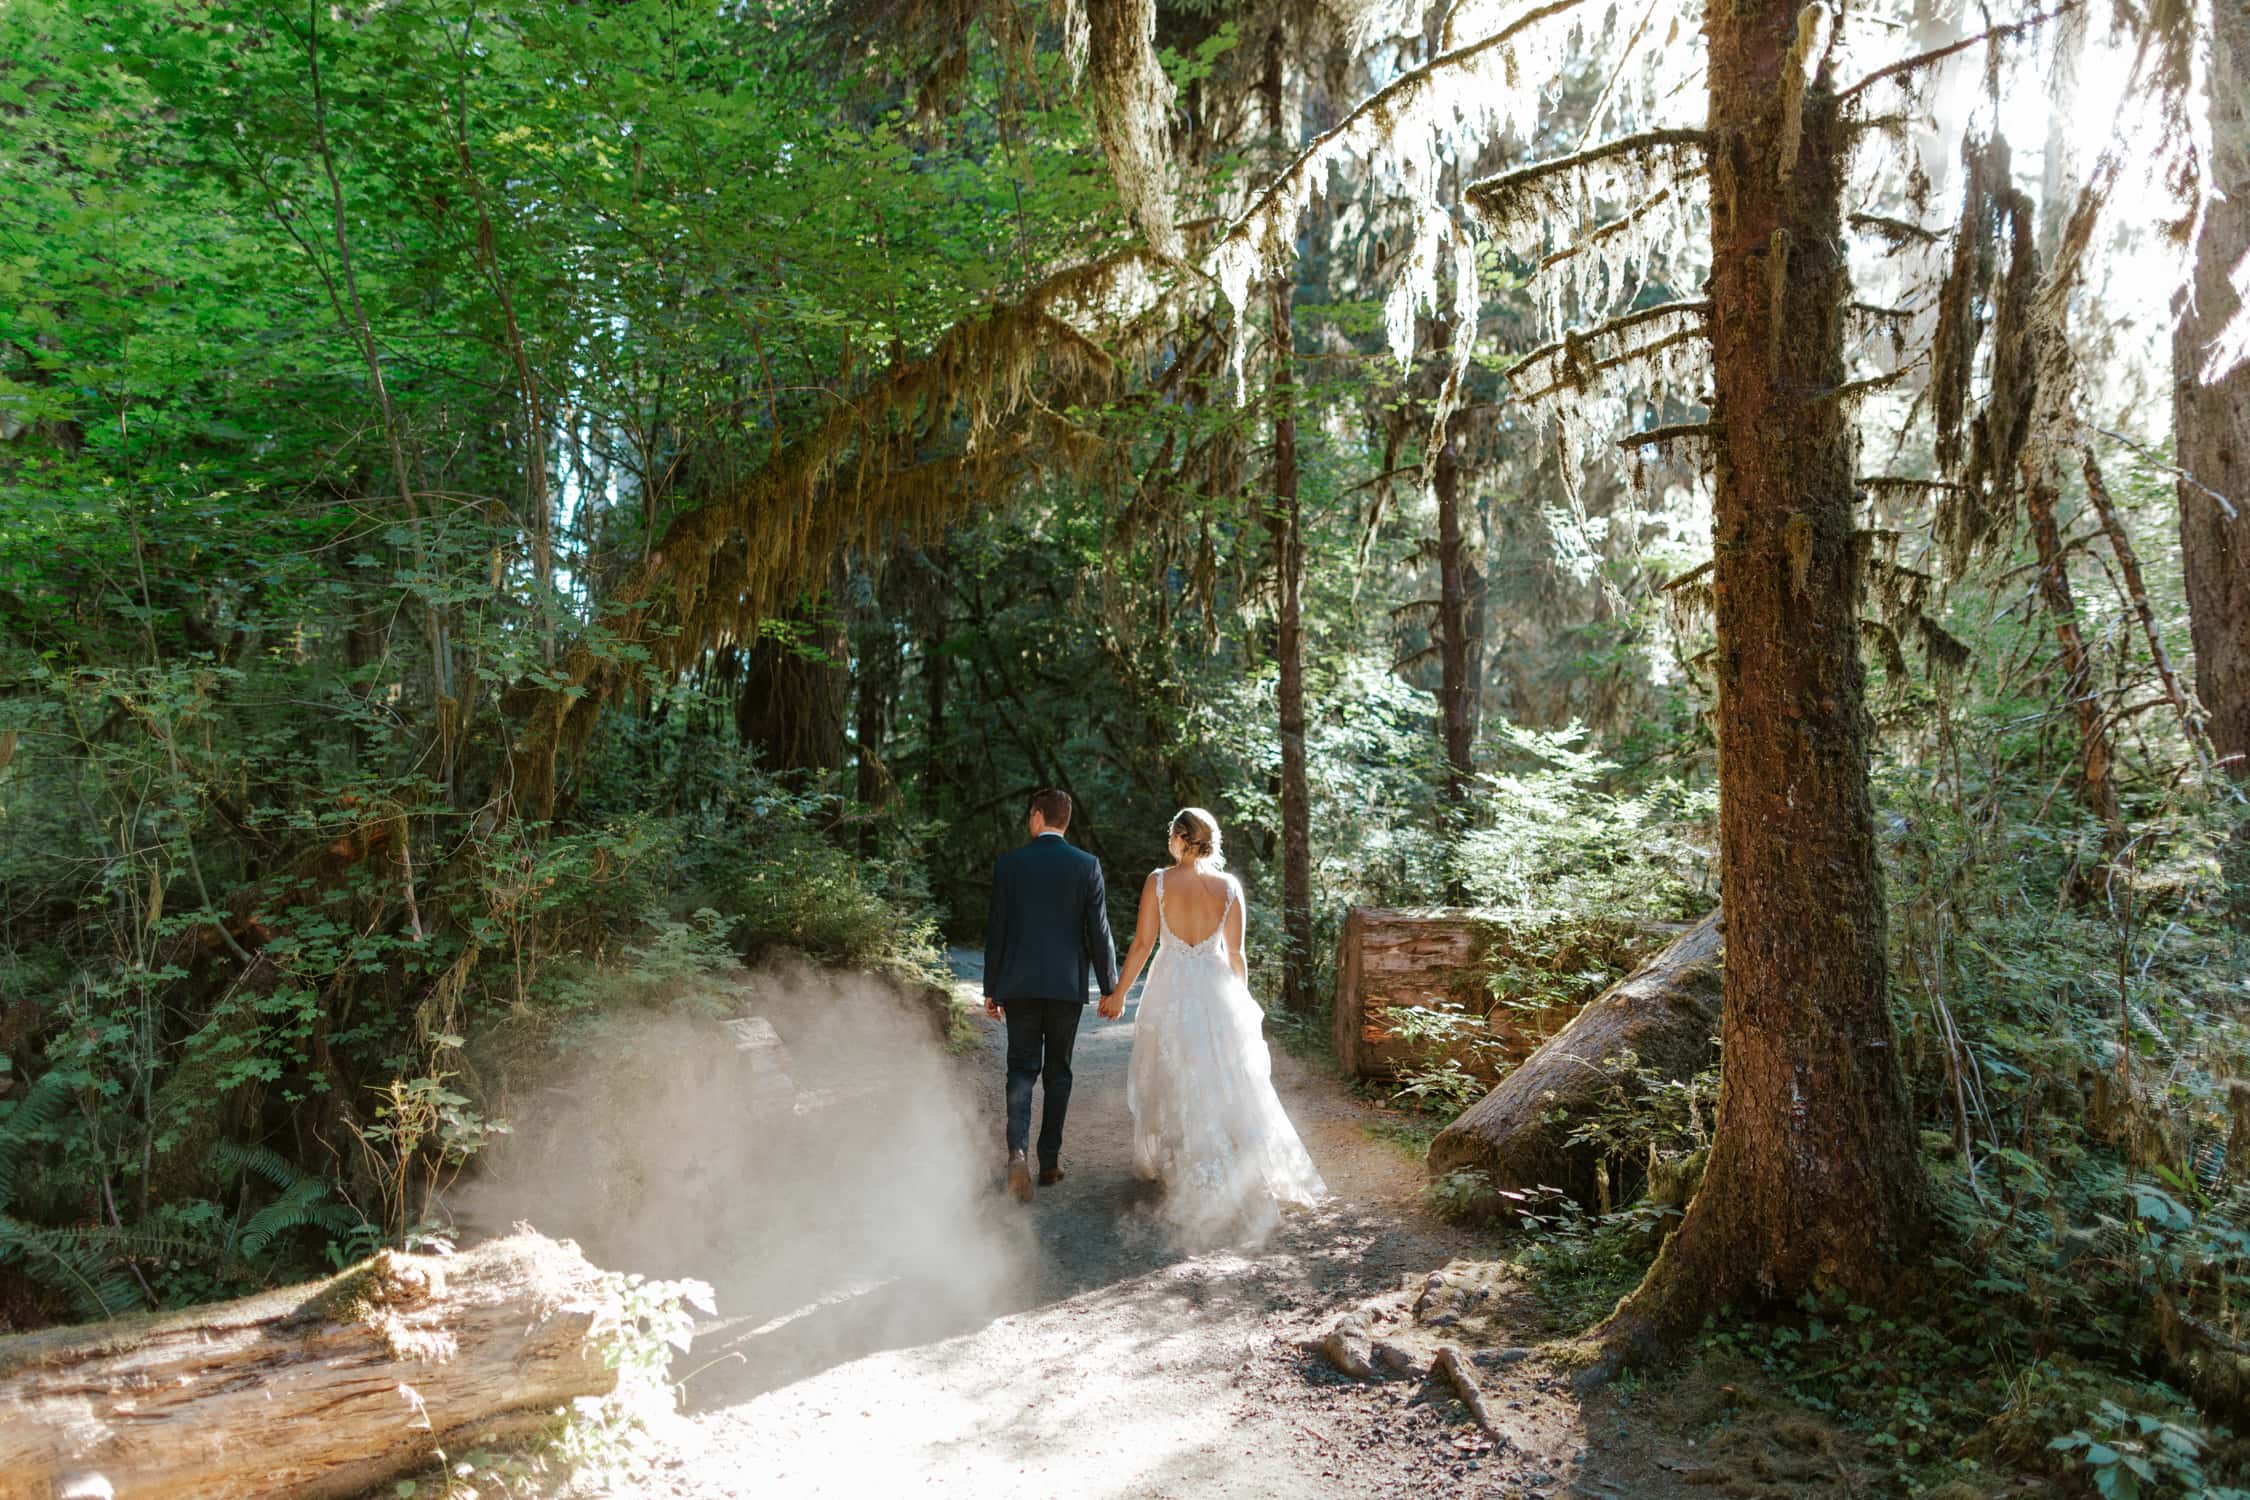 A couple in wedding attire holding hands and walking away from the camera in the Hoh Rainforest.